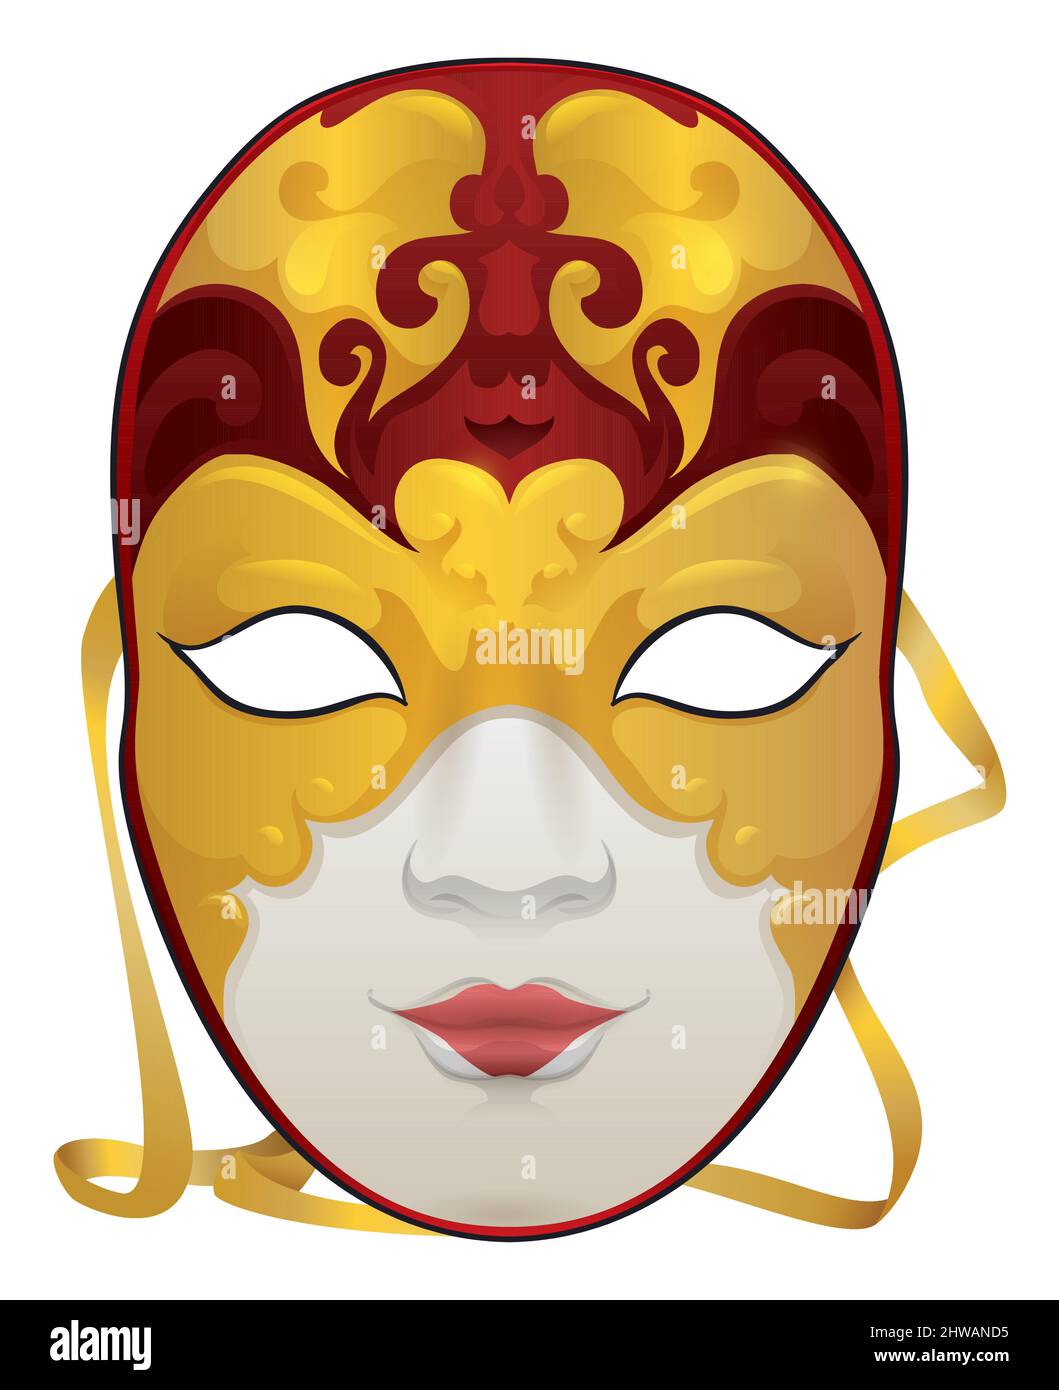 Female Volto mask decorated with golden and red design and yellow rope, to celebrate an elegant Venetian Carnival night. Stock Vector